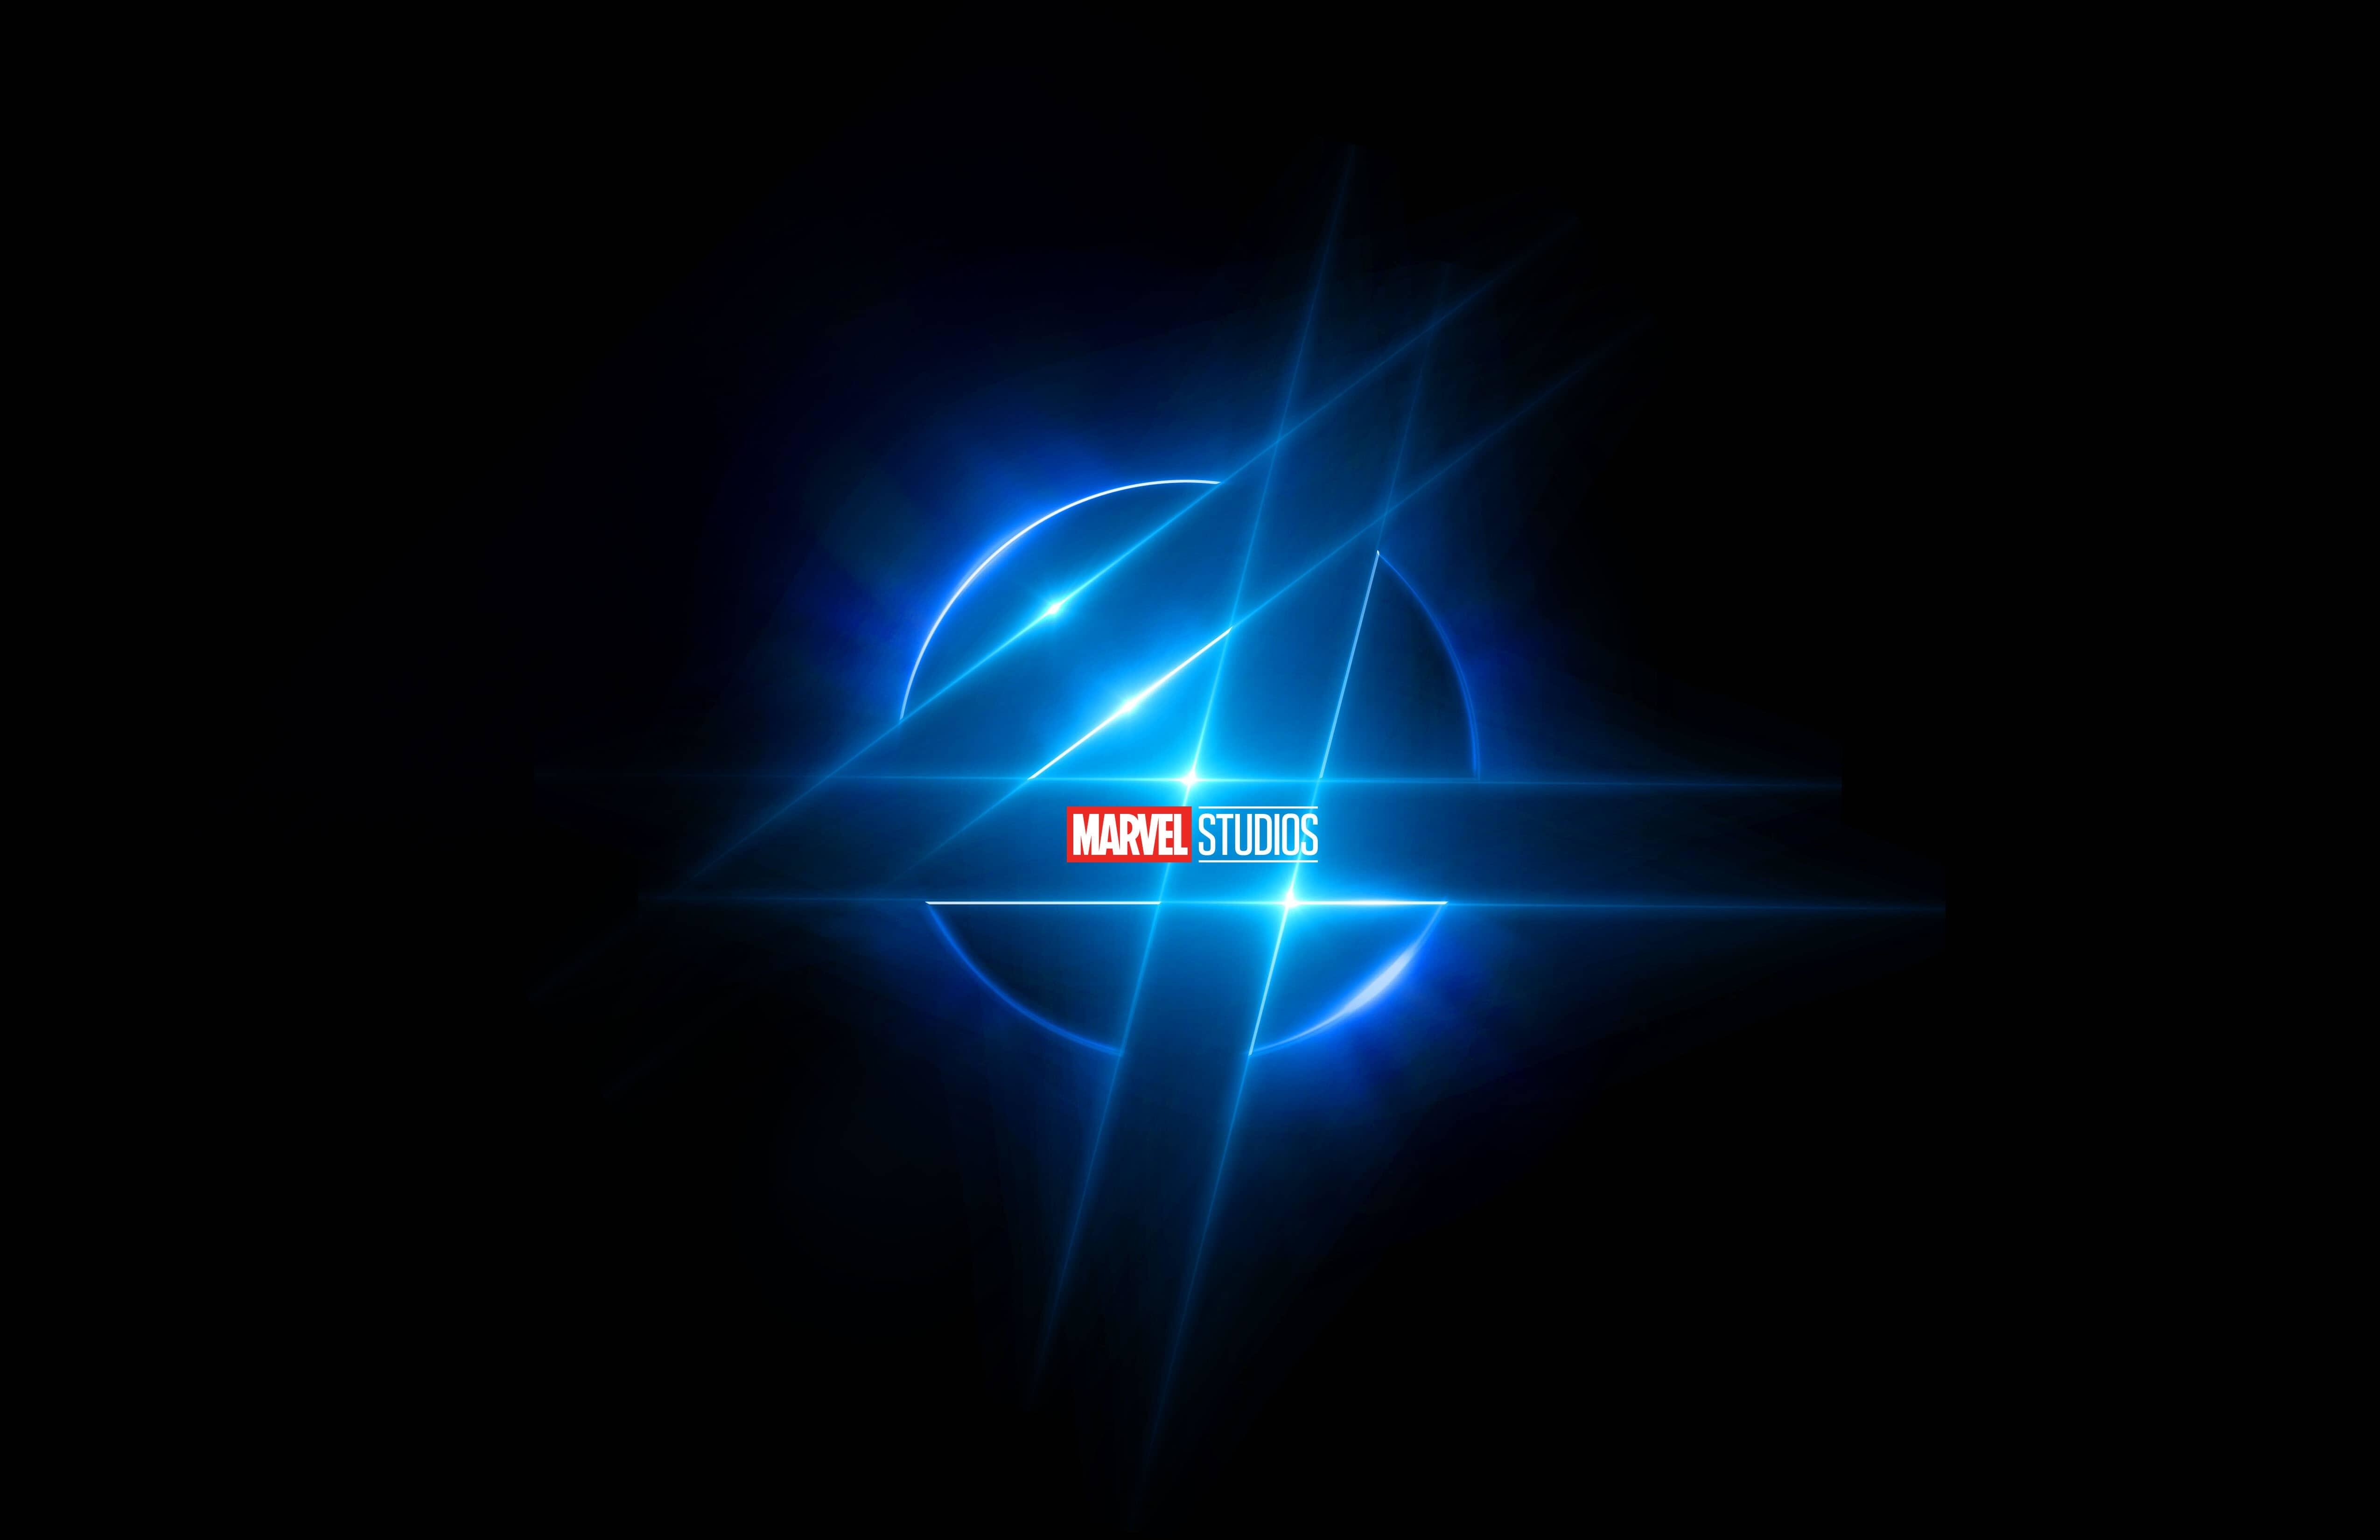 Marvel Fantastic Four 4k Logo Wallpaper Hd Movies 4k Wallpapers Images Photos And Background Wallpapers Den